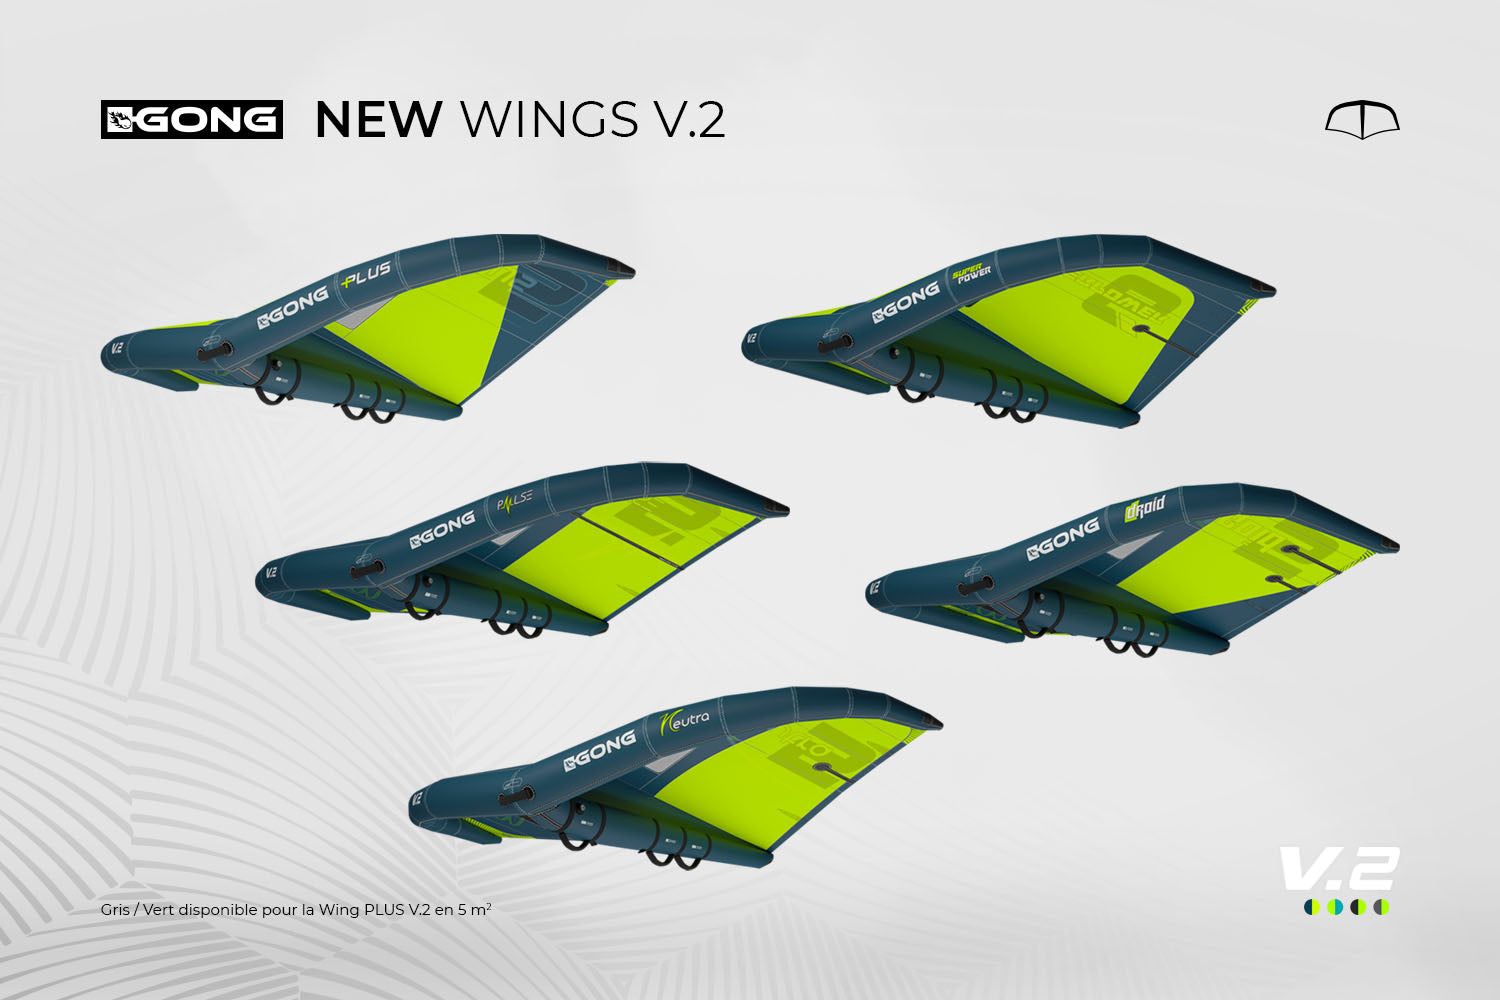 NEWS: THE V2 WINGS ARE ONLINE!